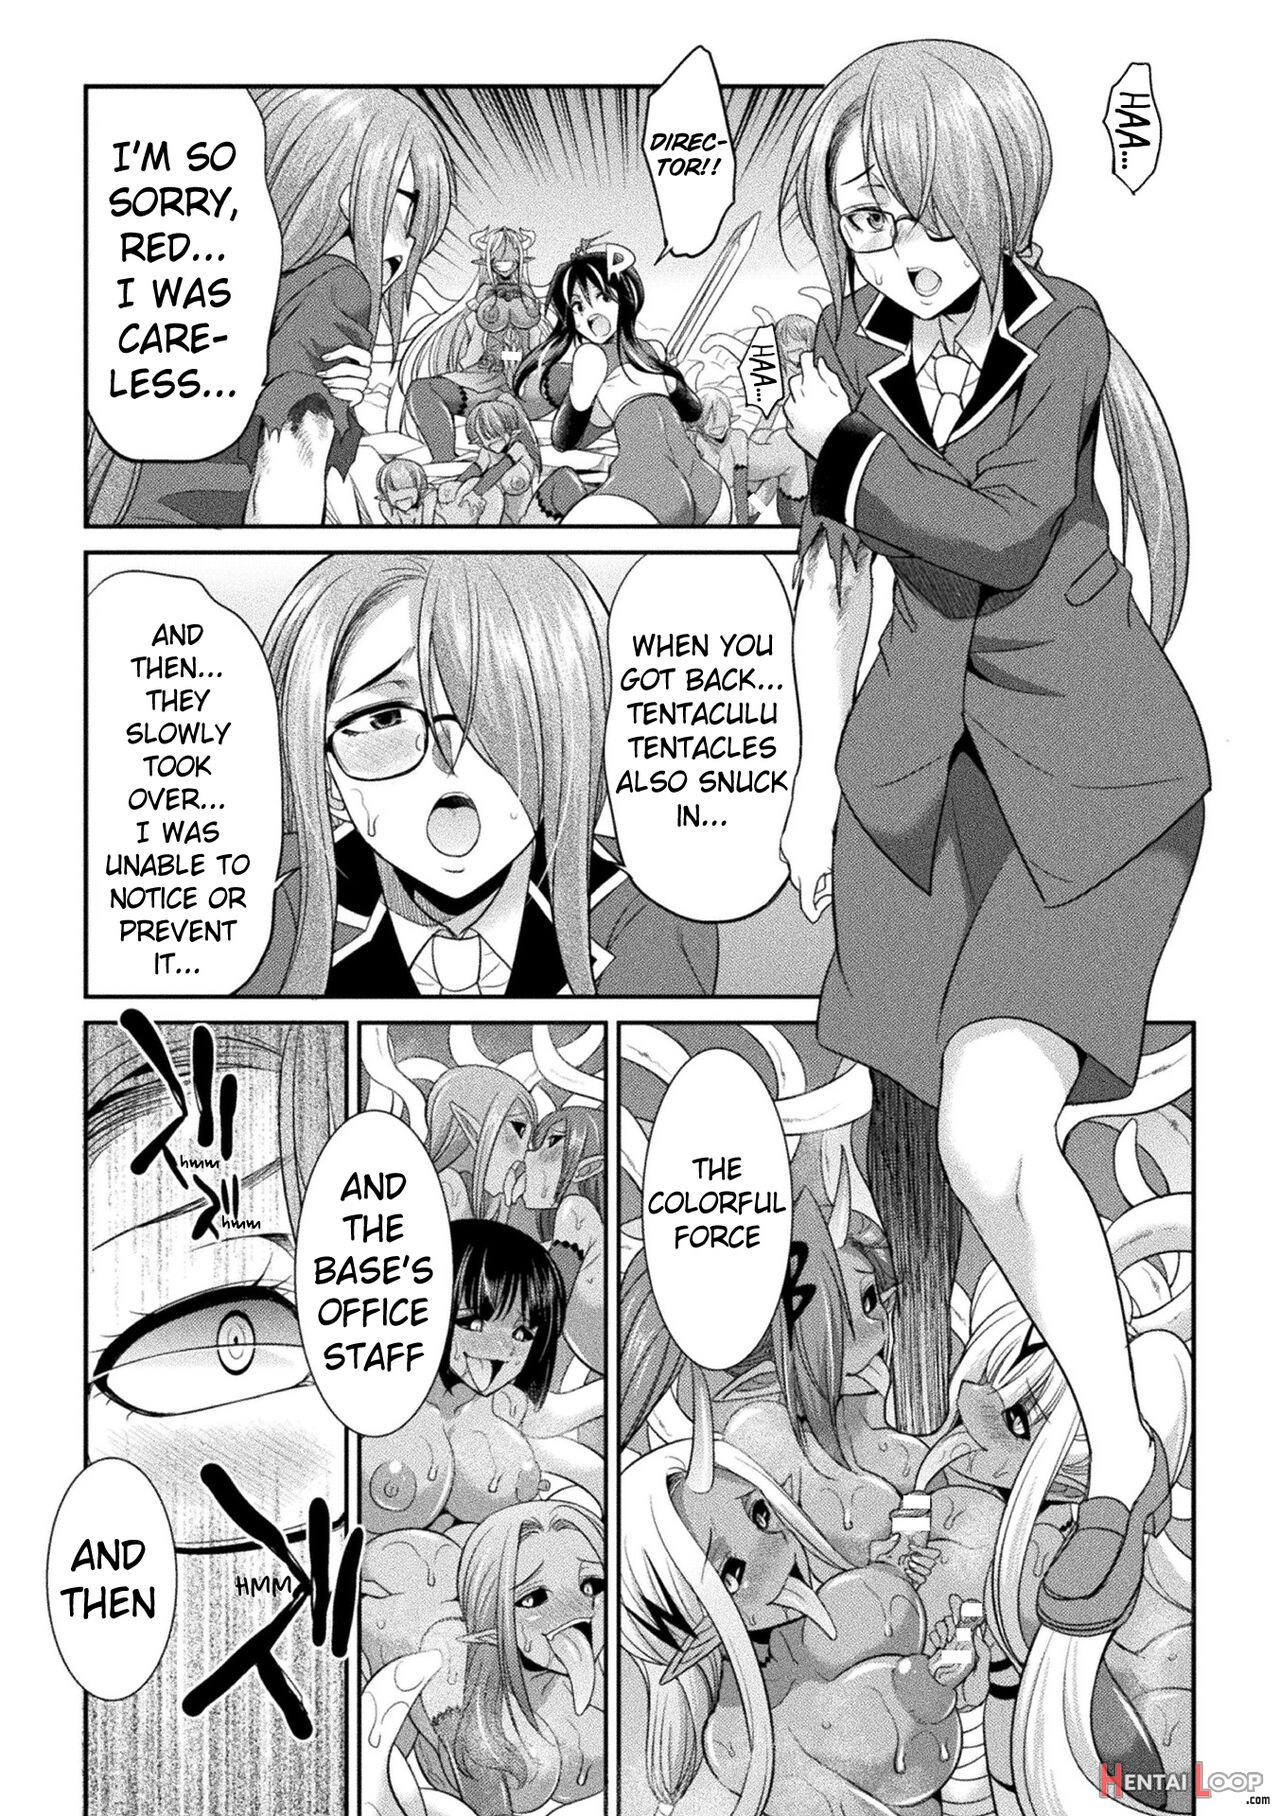 Special Duty Squadron Colorful Force Heroines Of Justice Vs The Tentacle Queen! The Great Battle Of Futa Training!? page 146